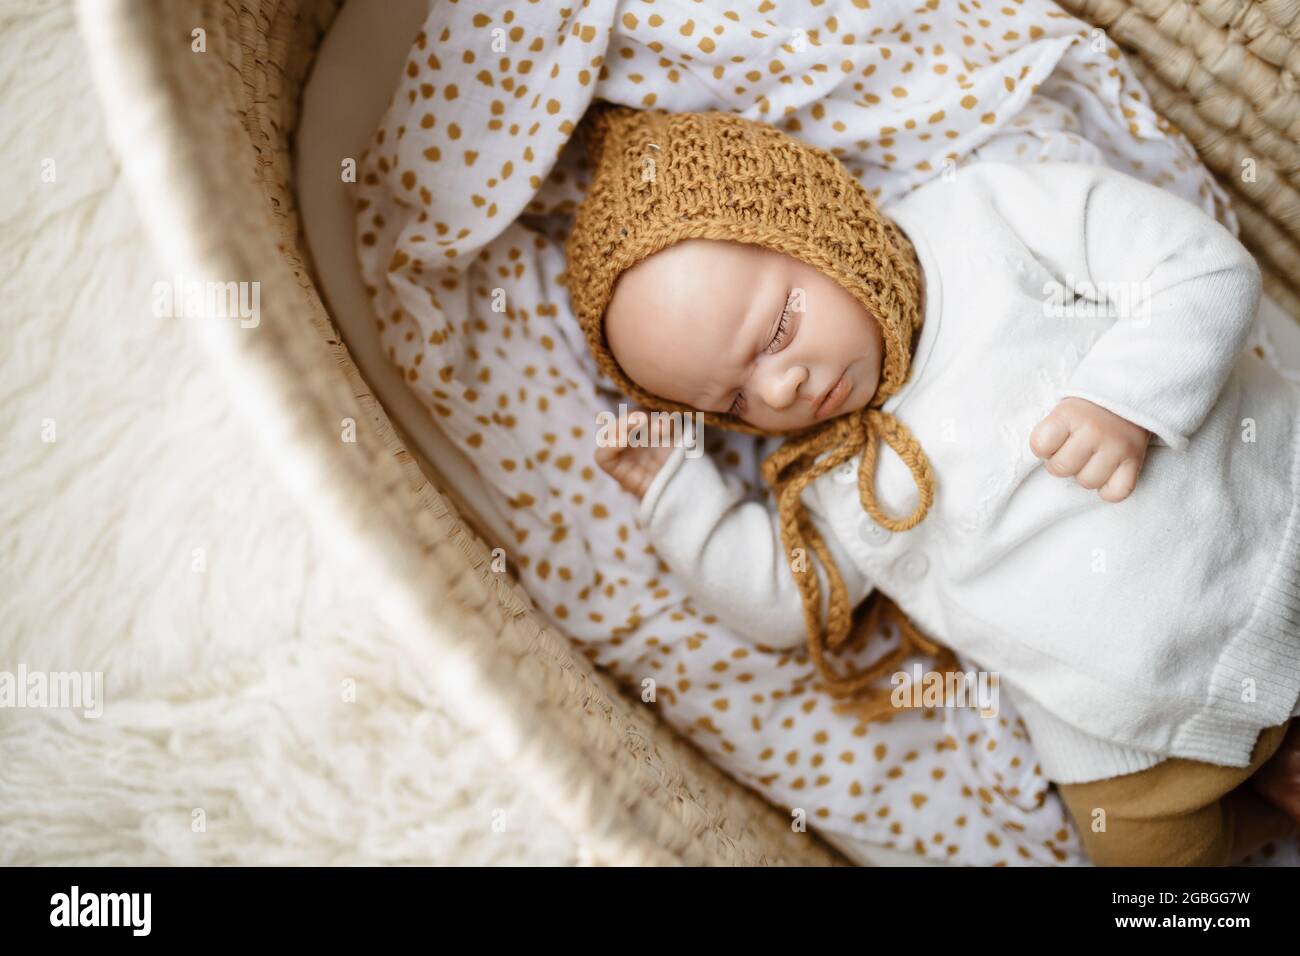 A reborn newborn baby doll toy dressed in a mustard colored bonnet hat and  a white cardigan lying in a cream moses basket bassinet Stock Photo - Alamy